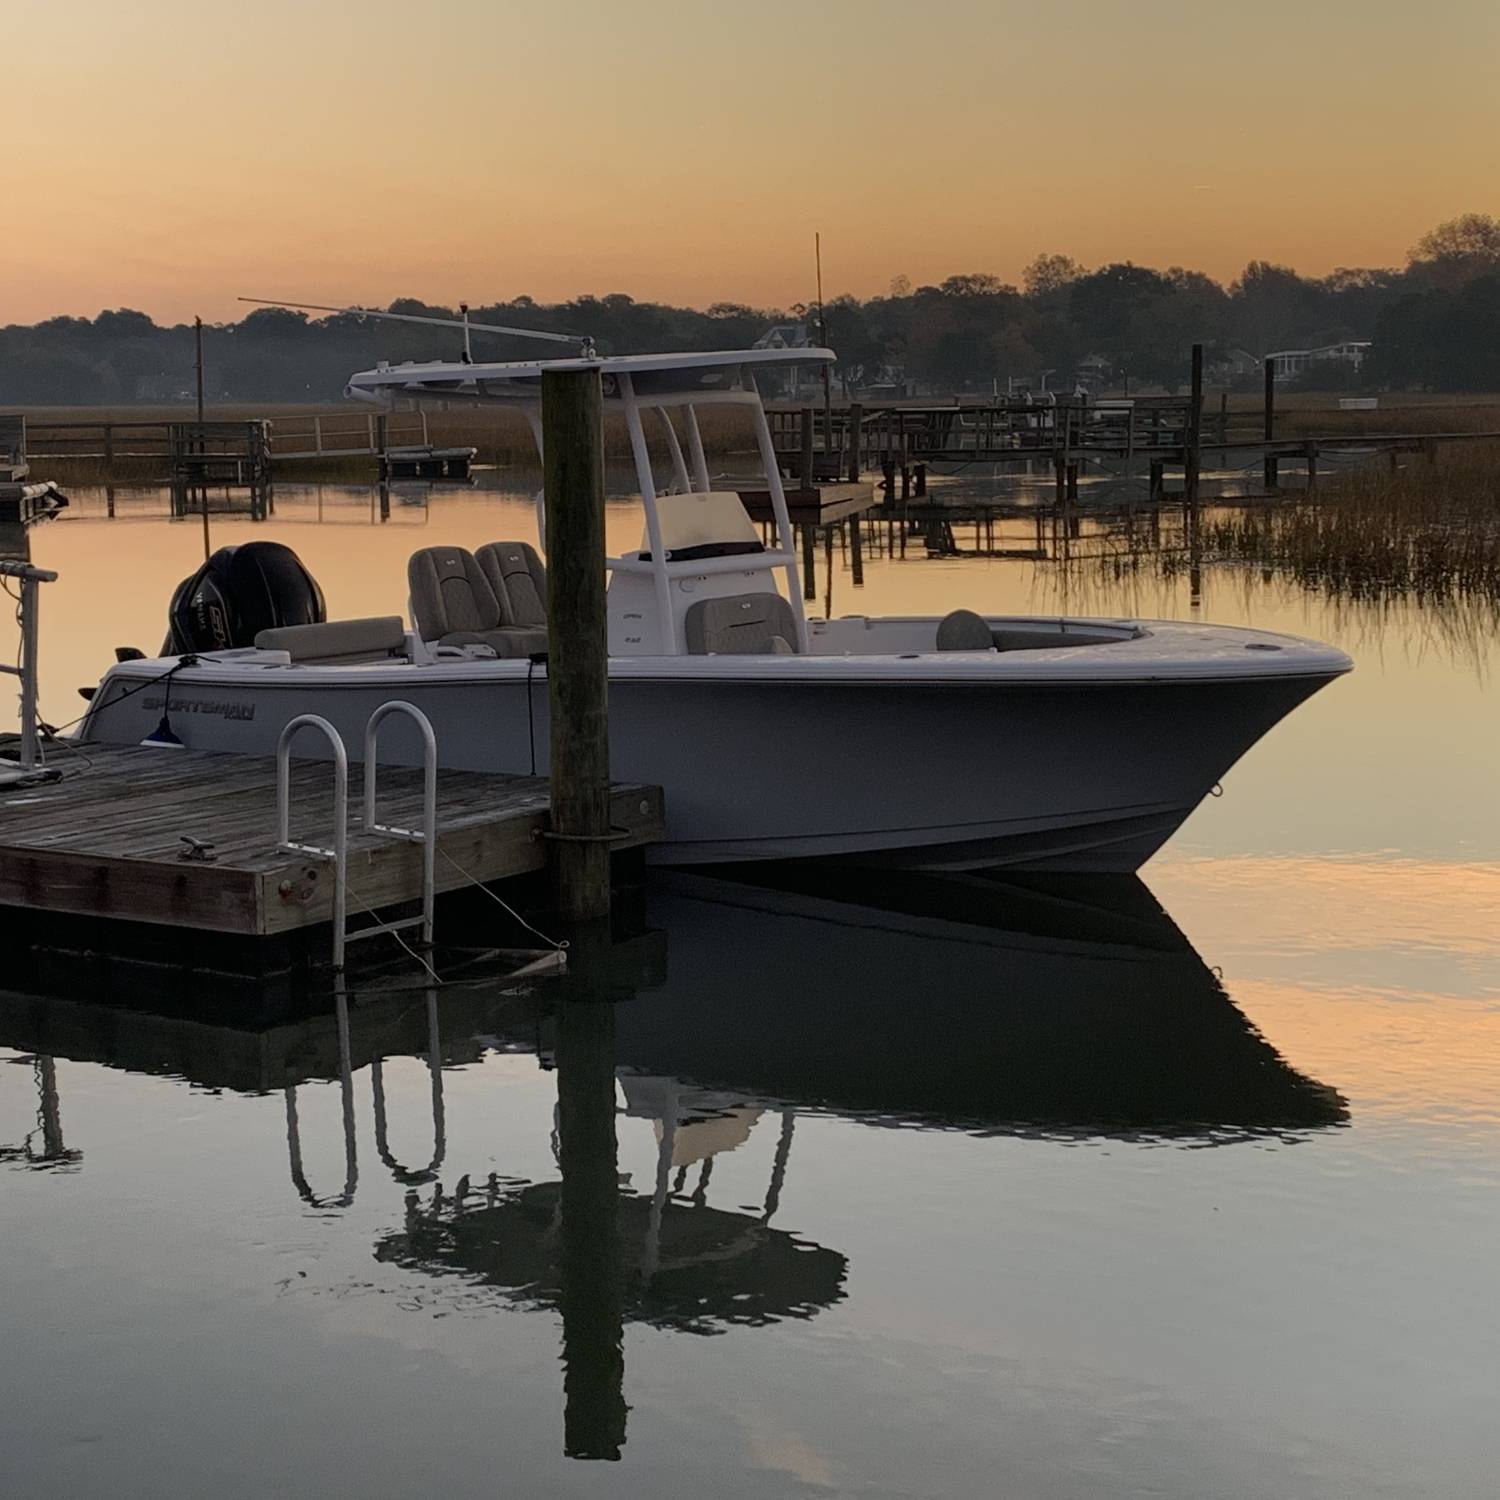 Title: Shem Creek - On board their Sportsman Open 232 Center Console - Location: Shem Creek. Participating in the Photo Contest #SportsmanOctober2023